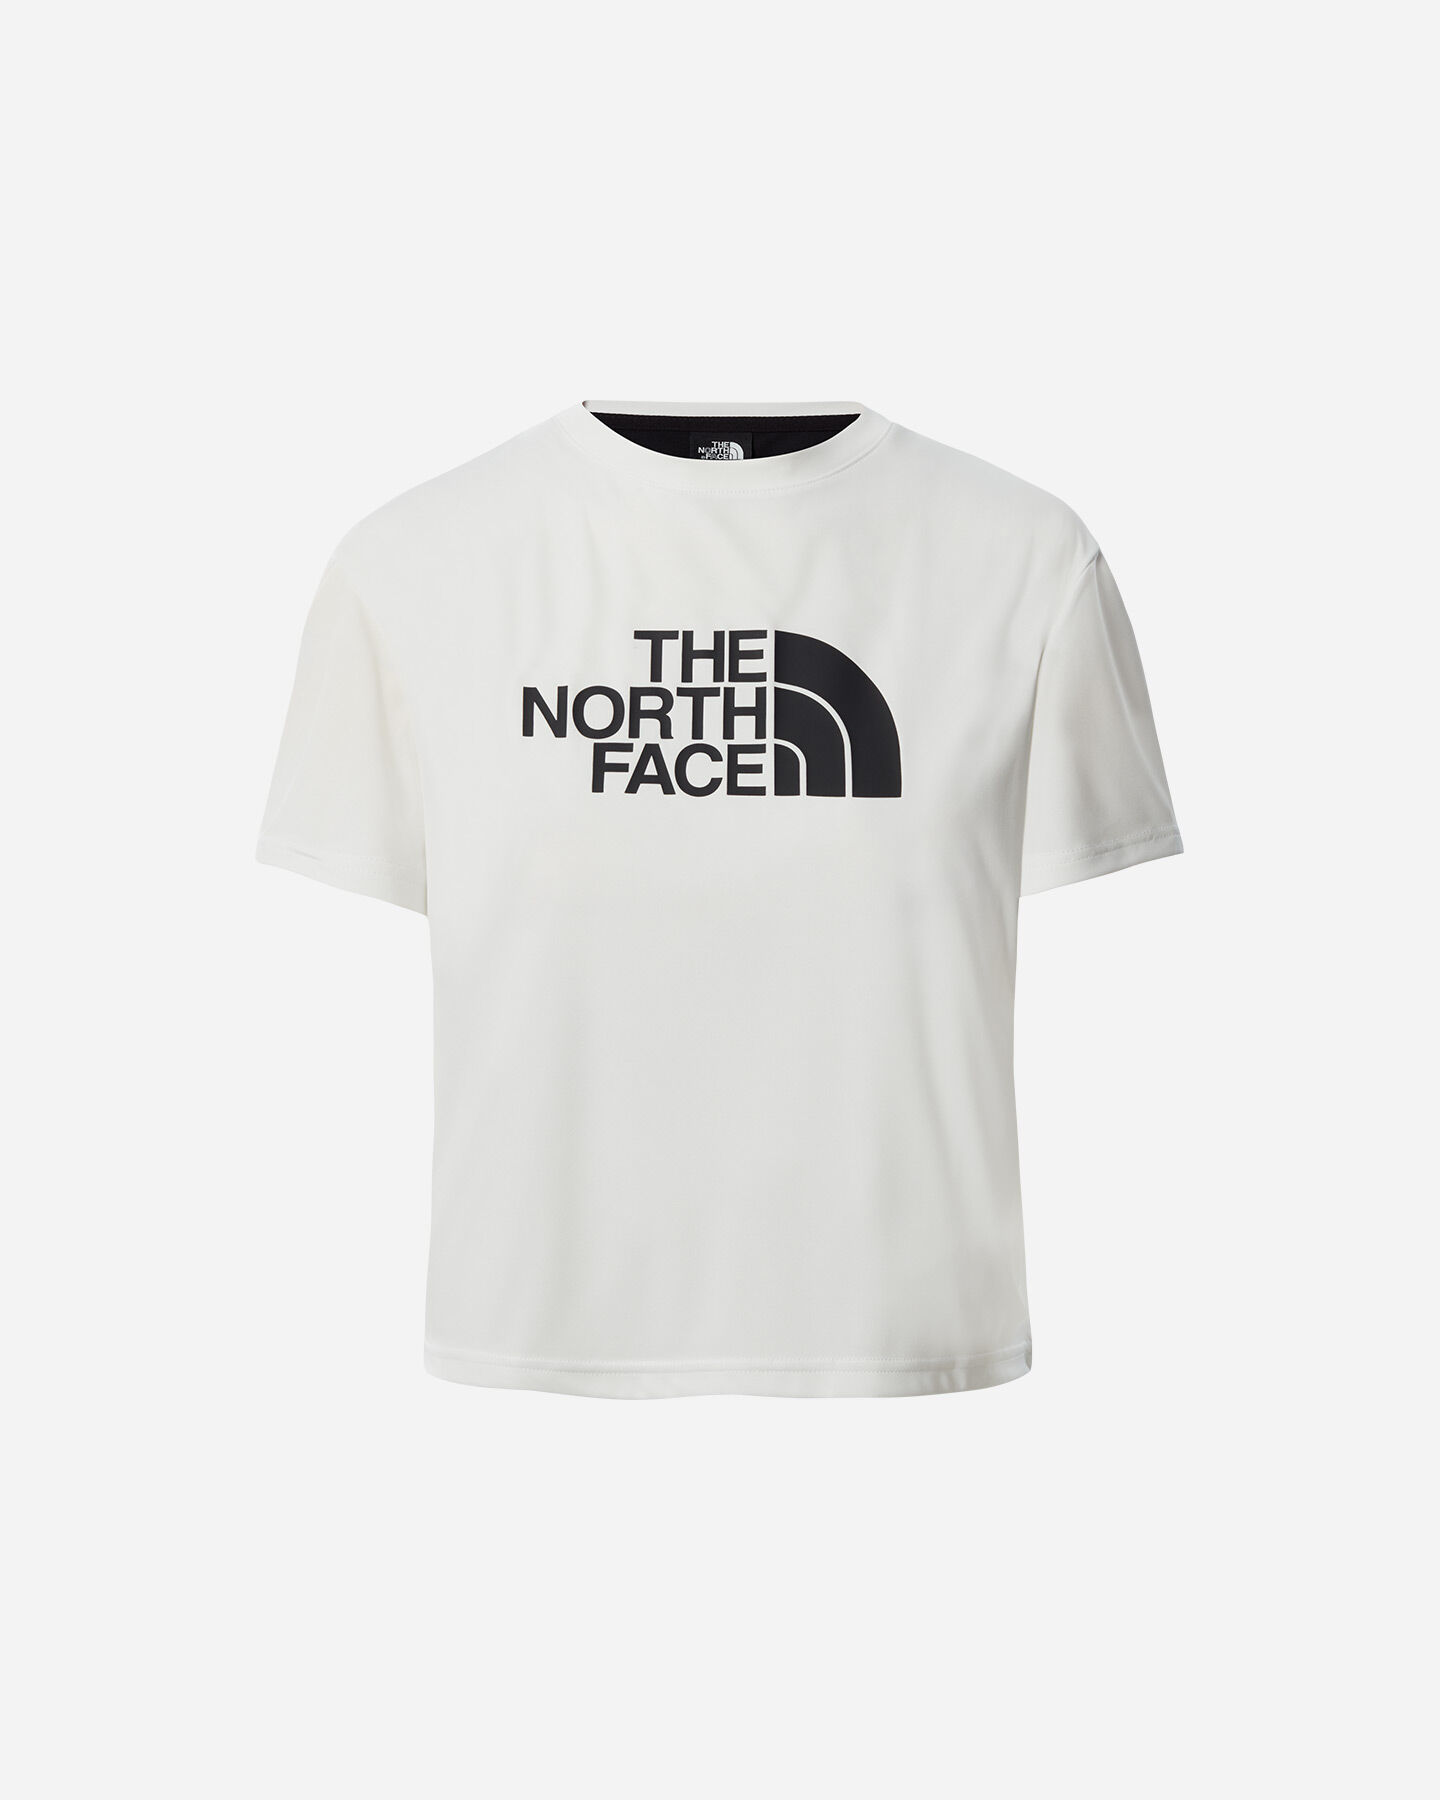  T-Shirt THE NORTH FACE CROPPED LOGO W S5303341|FN4|XS scatto 0